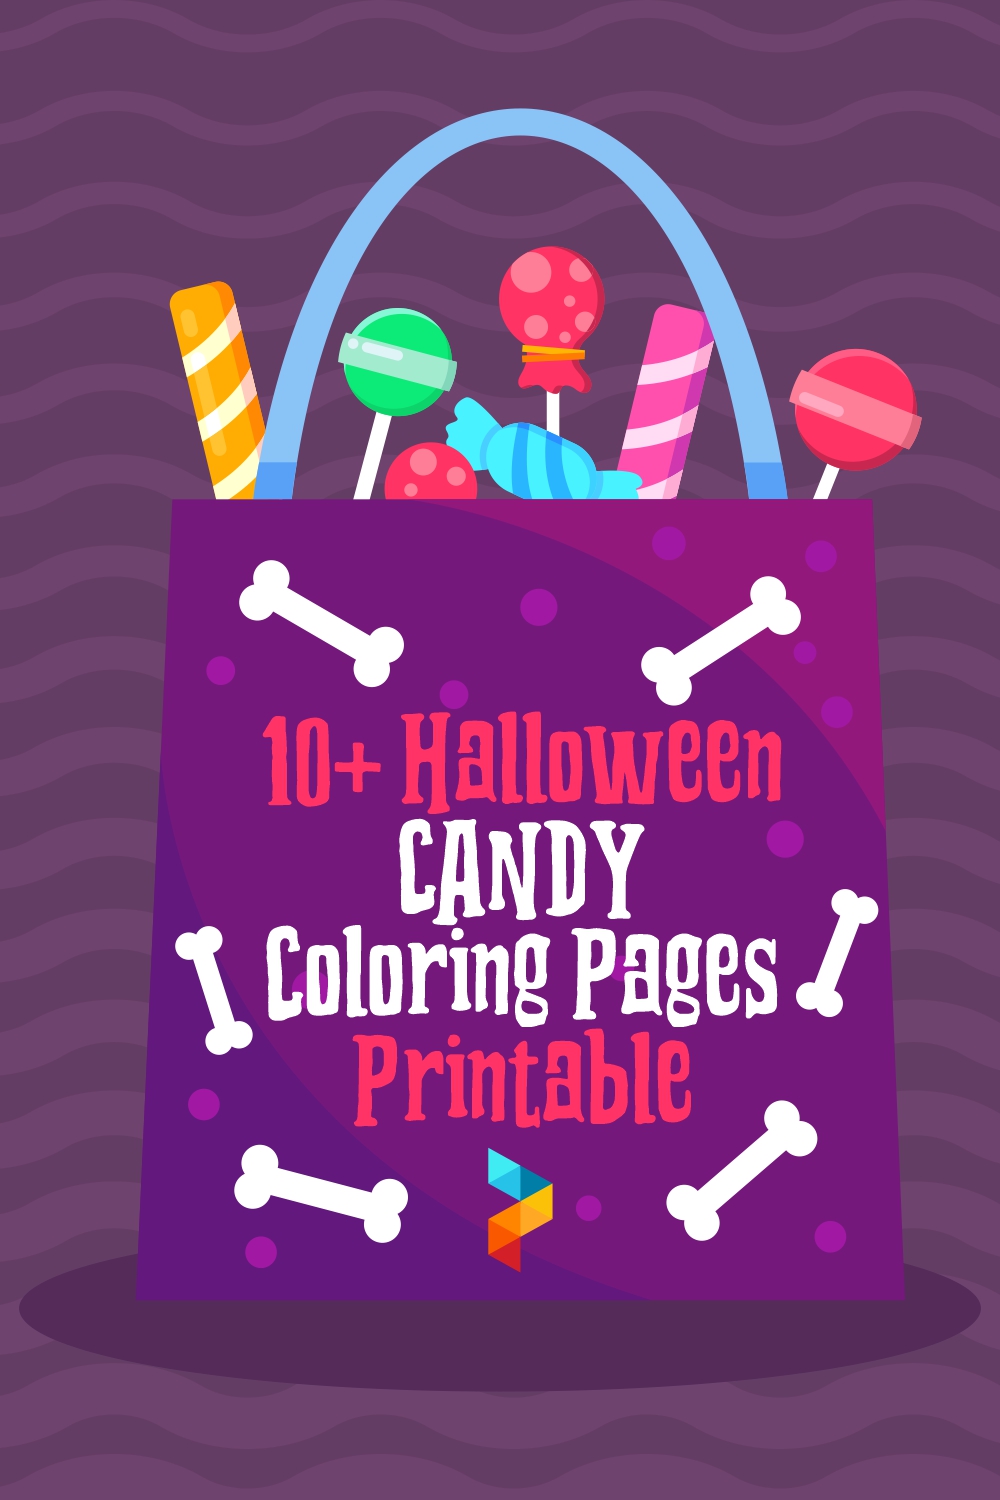 Halloween Candy Coloring Pages Printable